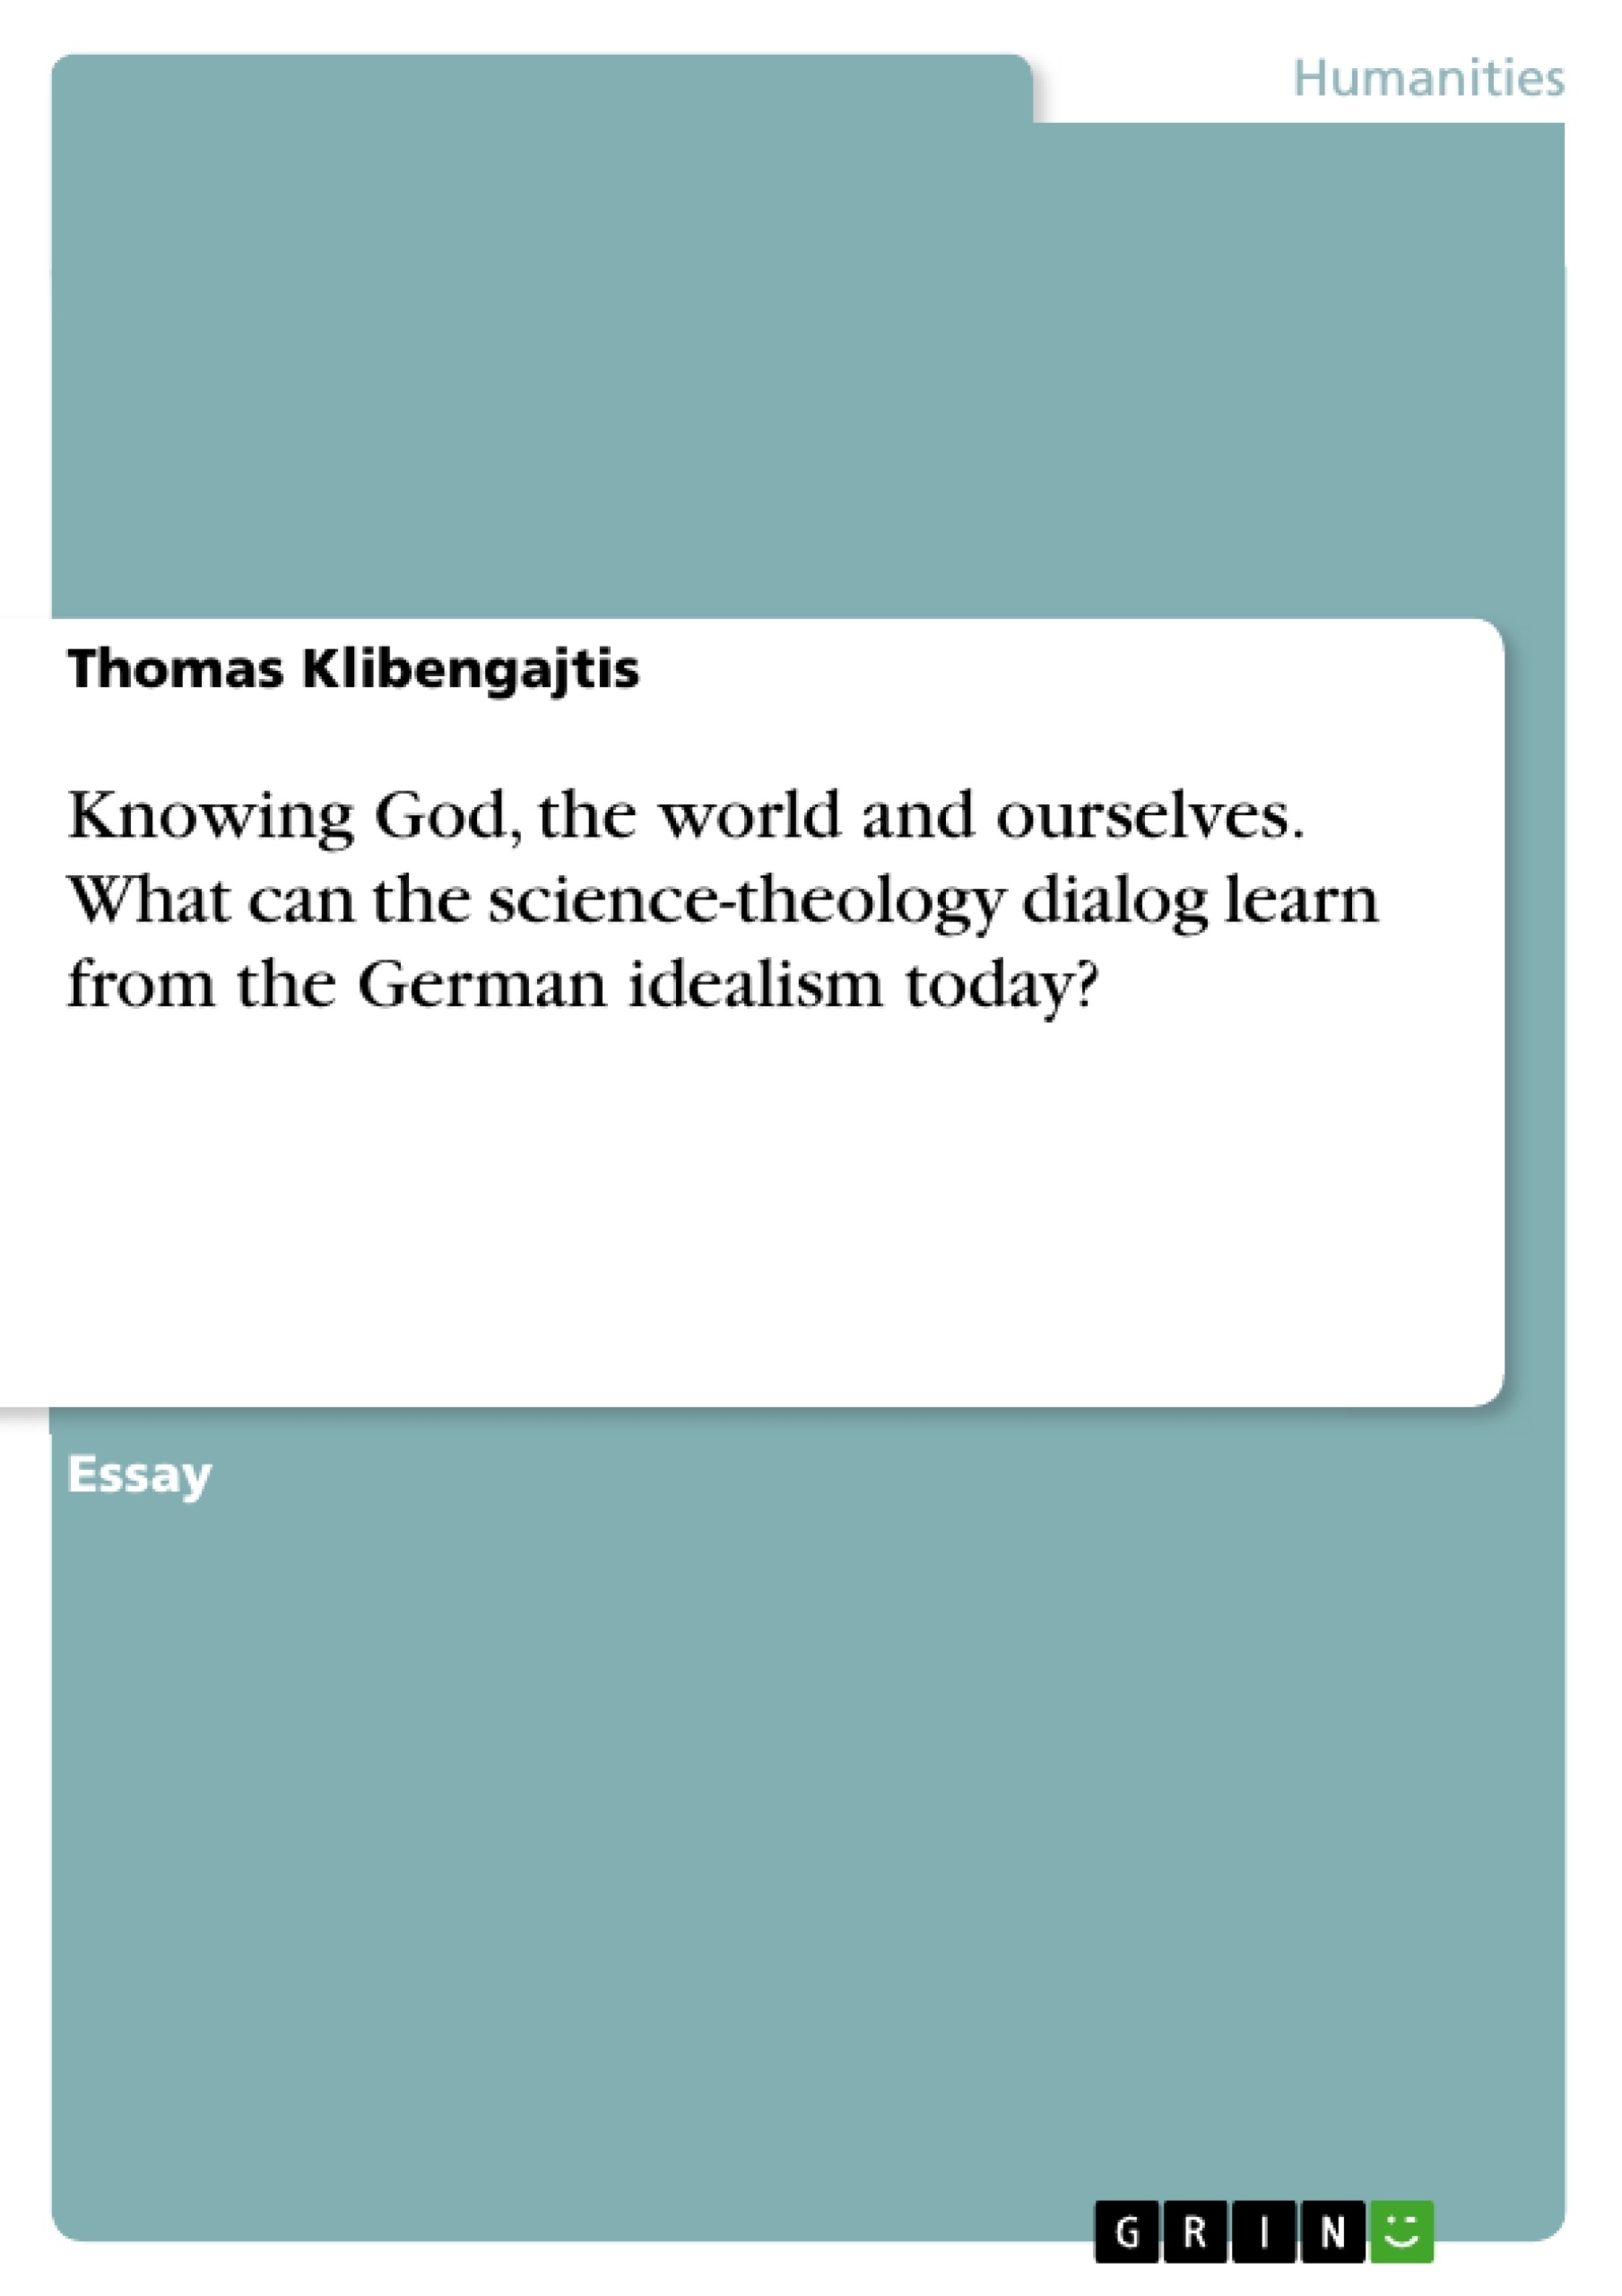 Título: Knowing God, the world and ourselves. What can the science-theology dialog learn from the German idealism today?